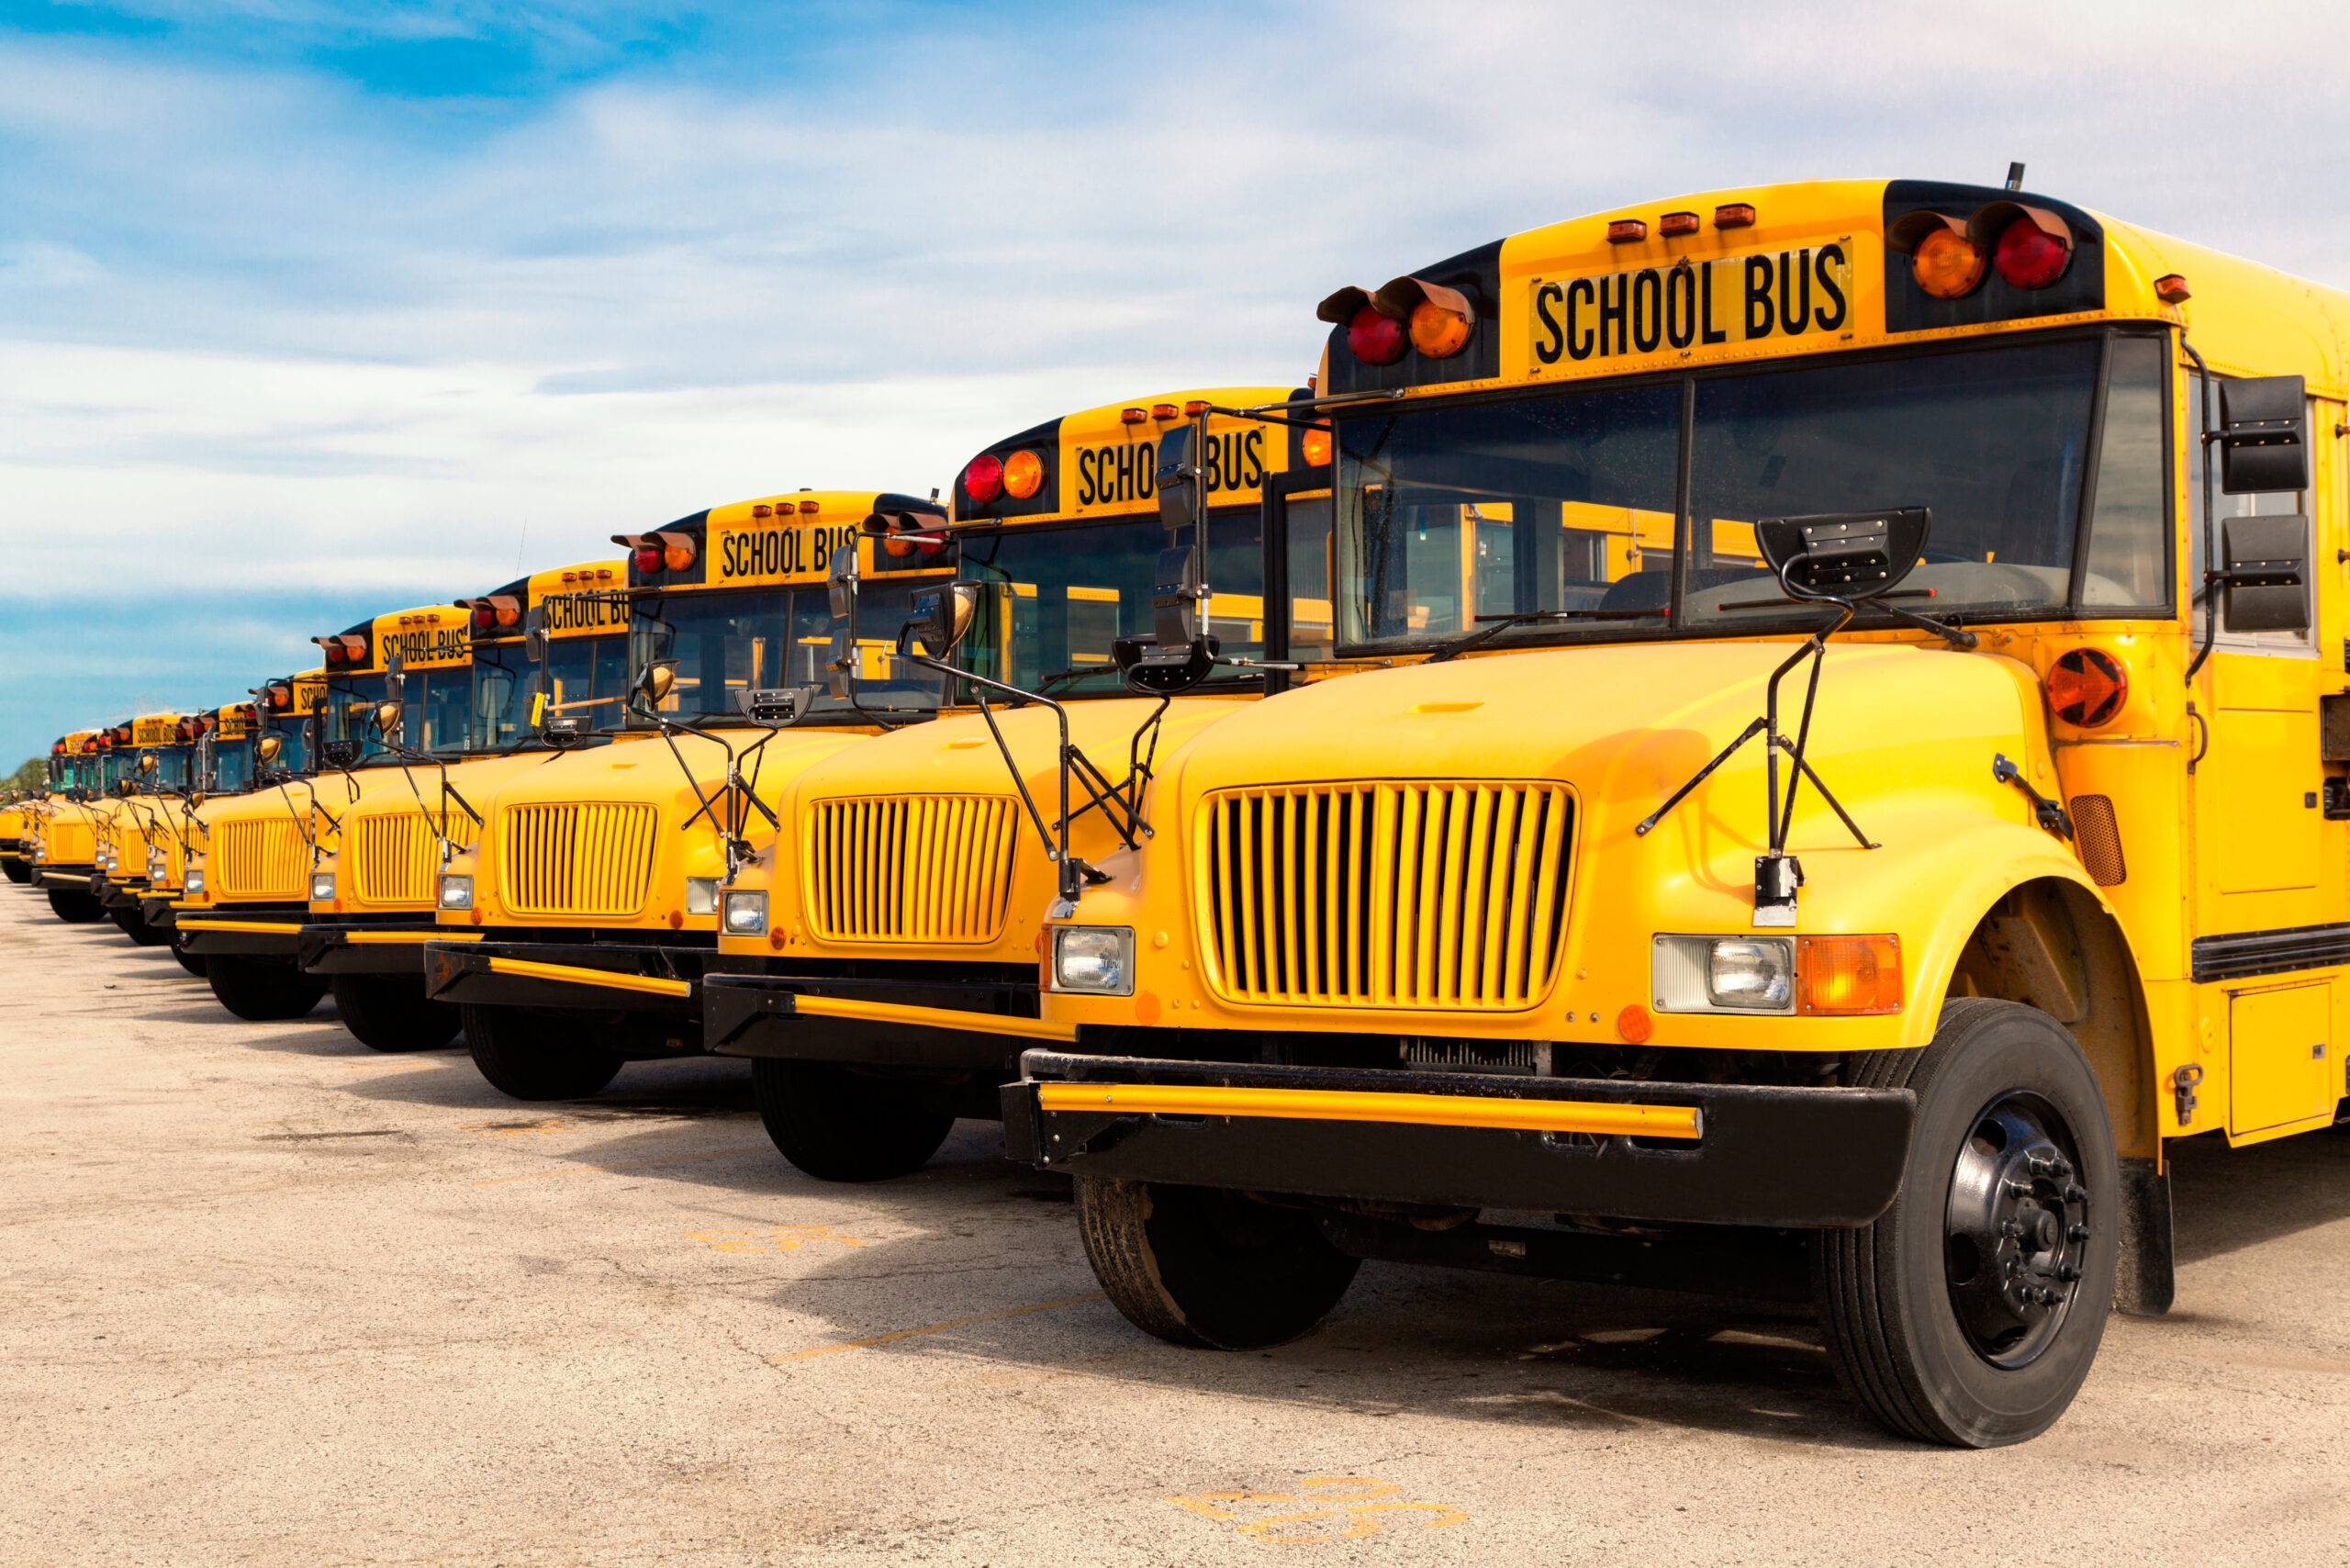 Row of yellow school buses (School Fleet) lined up in a parking lot